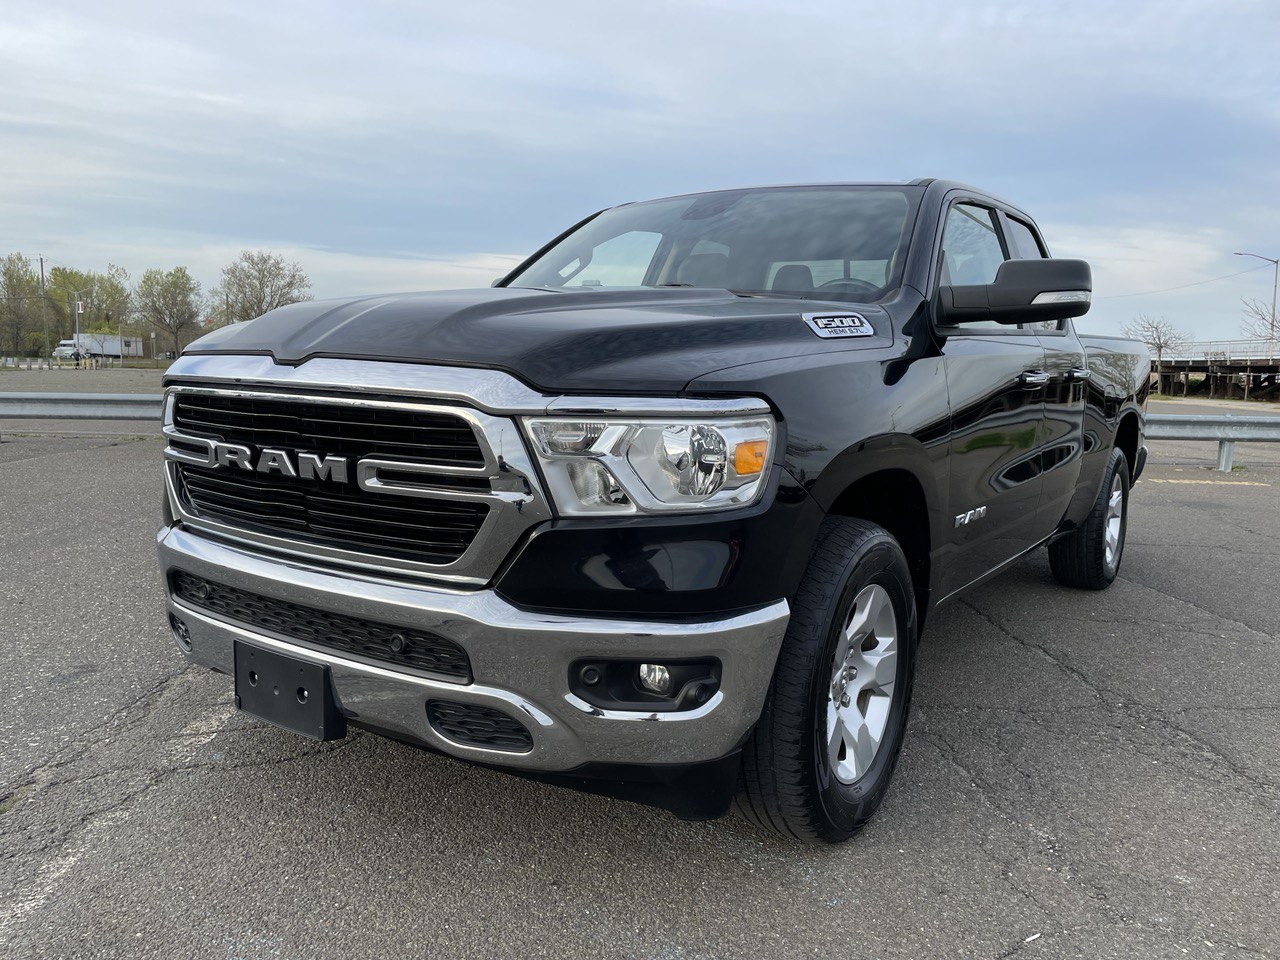 Used Car - 2020 RAM 1500 Big Horn 4x4 for Sale in Staten Island, NY